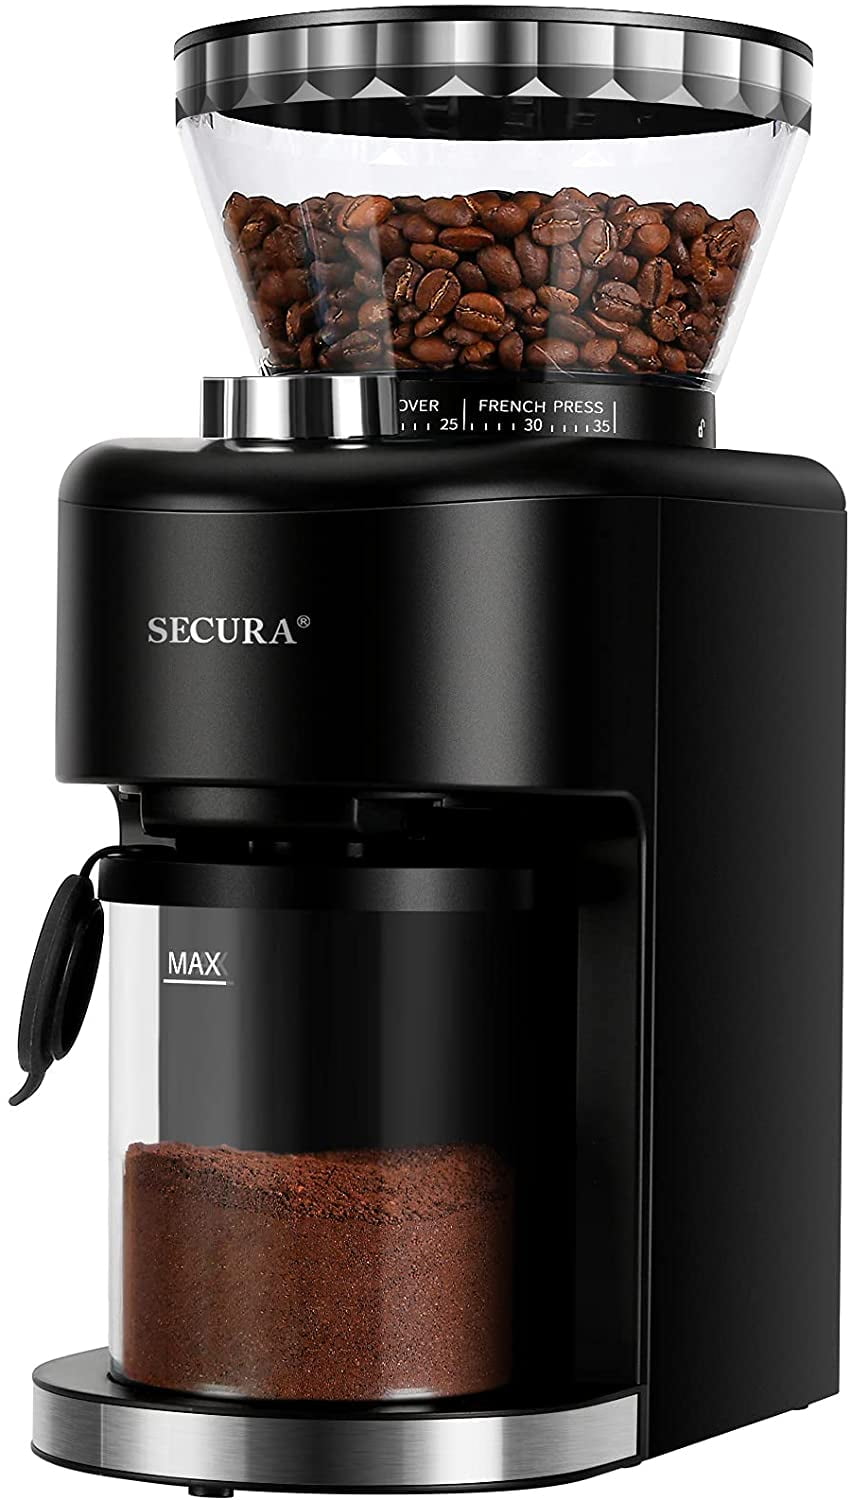 Sulypo Electric Burr Coffee Grinder with Cone Ceramic Mills,Adjustable  Setting Slow-Grind Result Better Taste Coffee(upgraded inner)